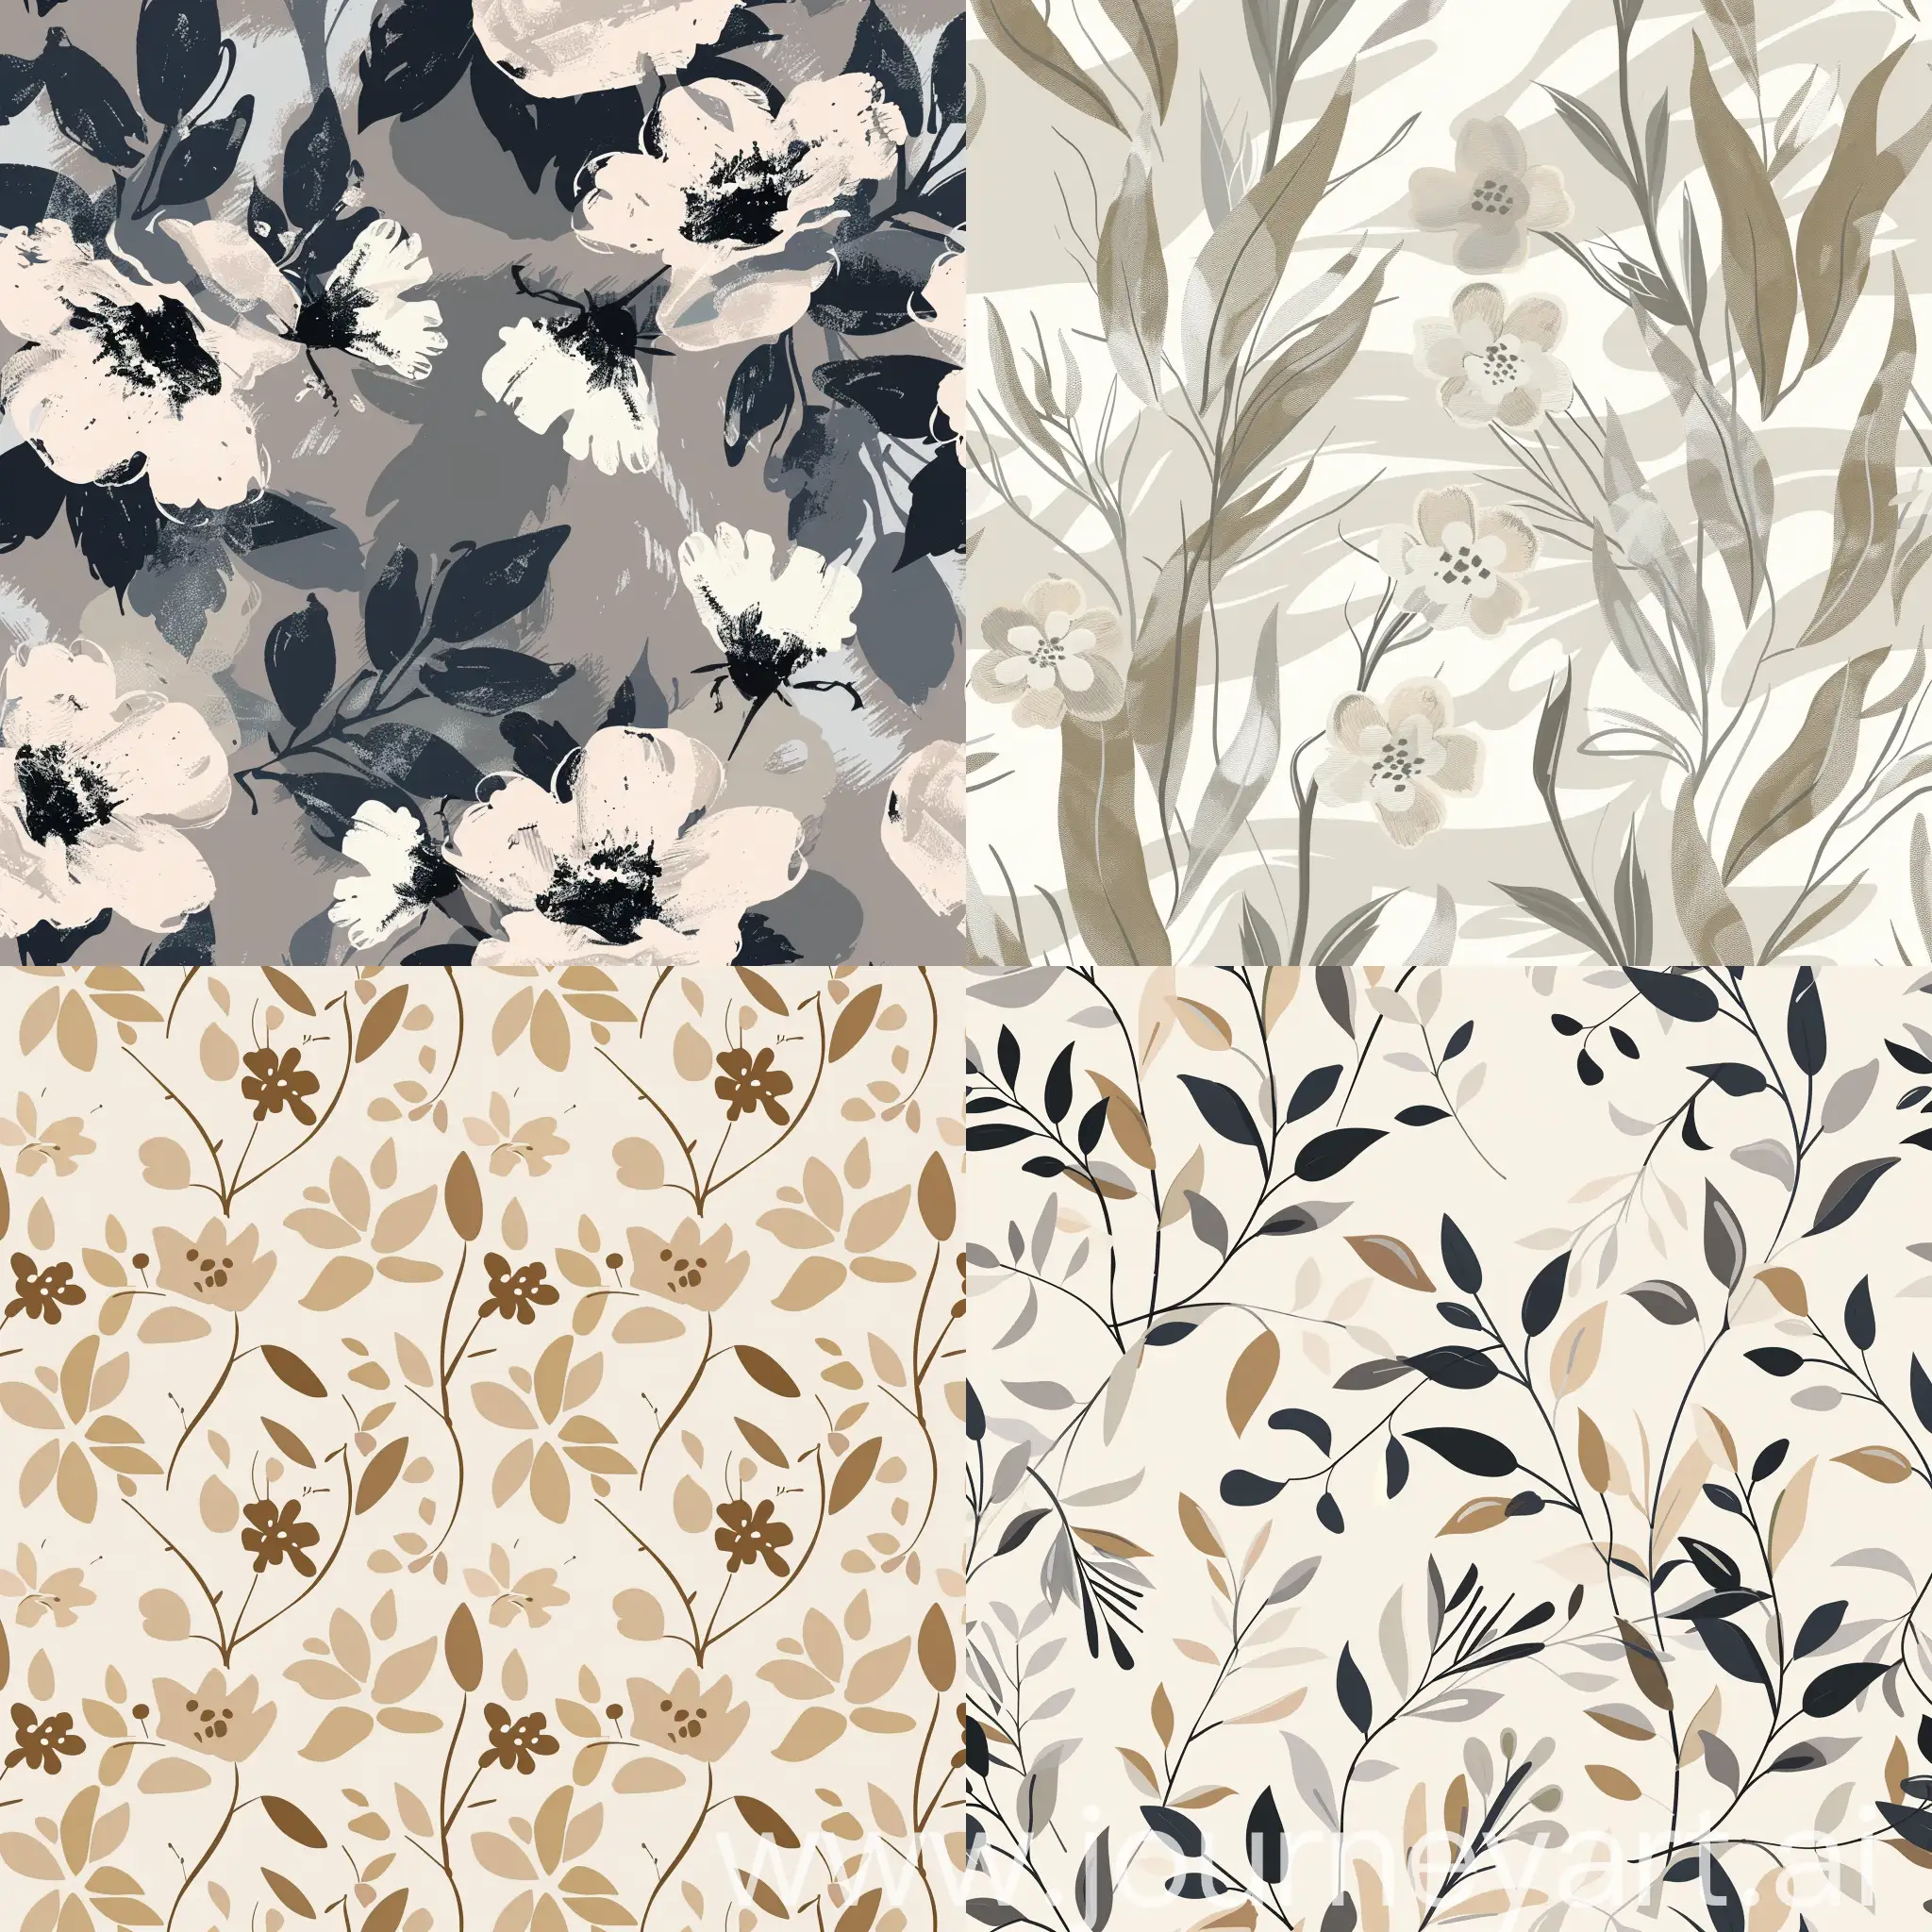 Neutral-Colour-Abstract-Floral-Seamless-Pattern-Design